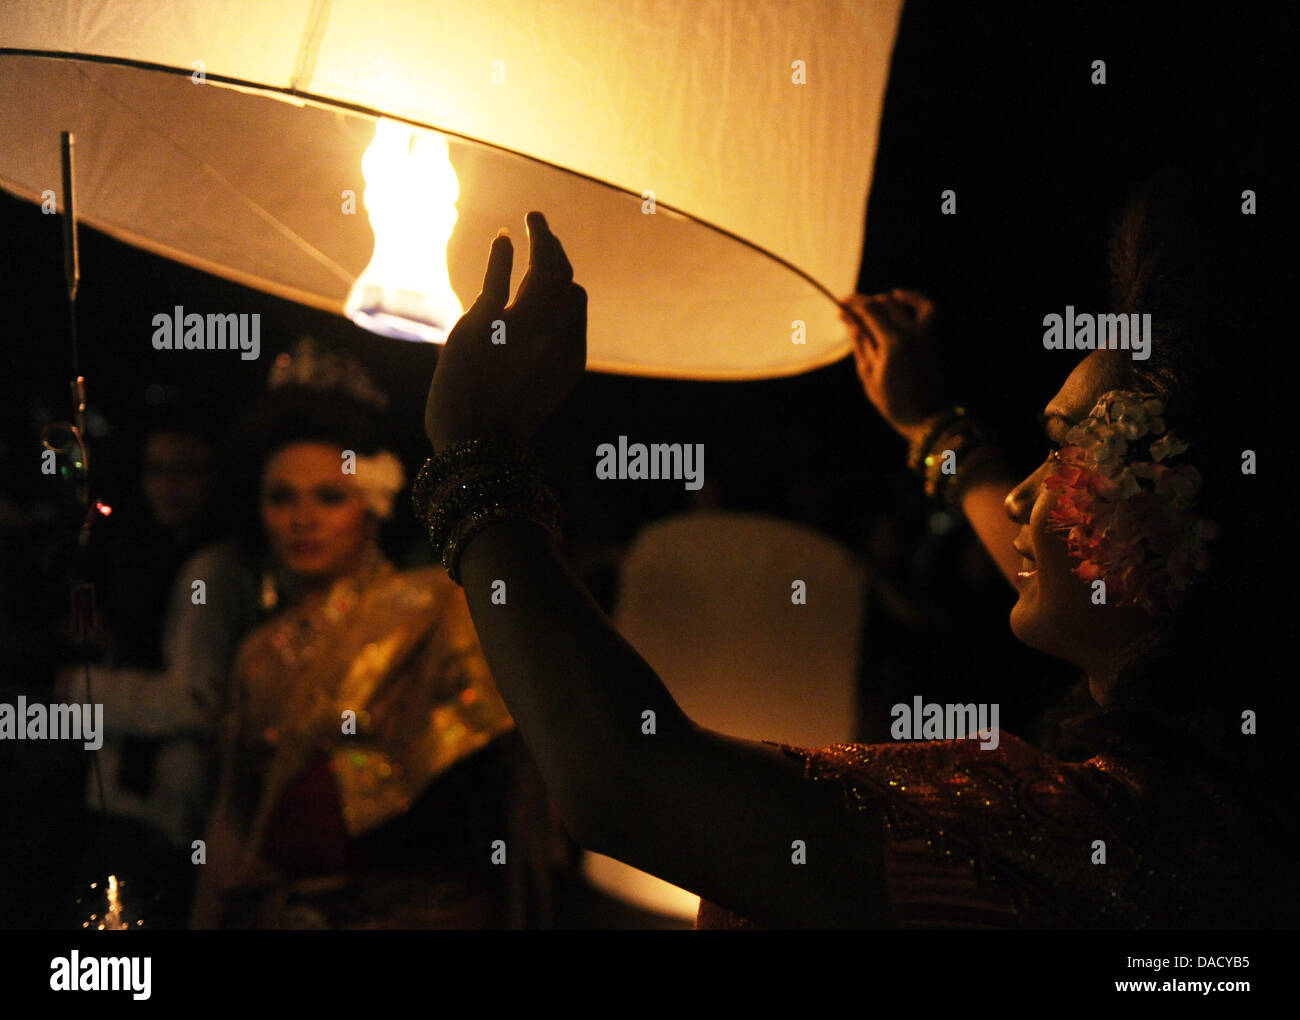 A woman dressed in a traditional Thai costume lights a paper lantern called Khom Loi at the Ping river during the festival of lights Loy Krathong in Chiang Mai, Thailand, 10 November 2011. The festival is celebrated in the whole country during full moon of the twelfth month of the year and originates from a Hindu tradition. Photo: Jens Kalaene Stock Photo